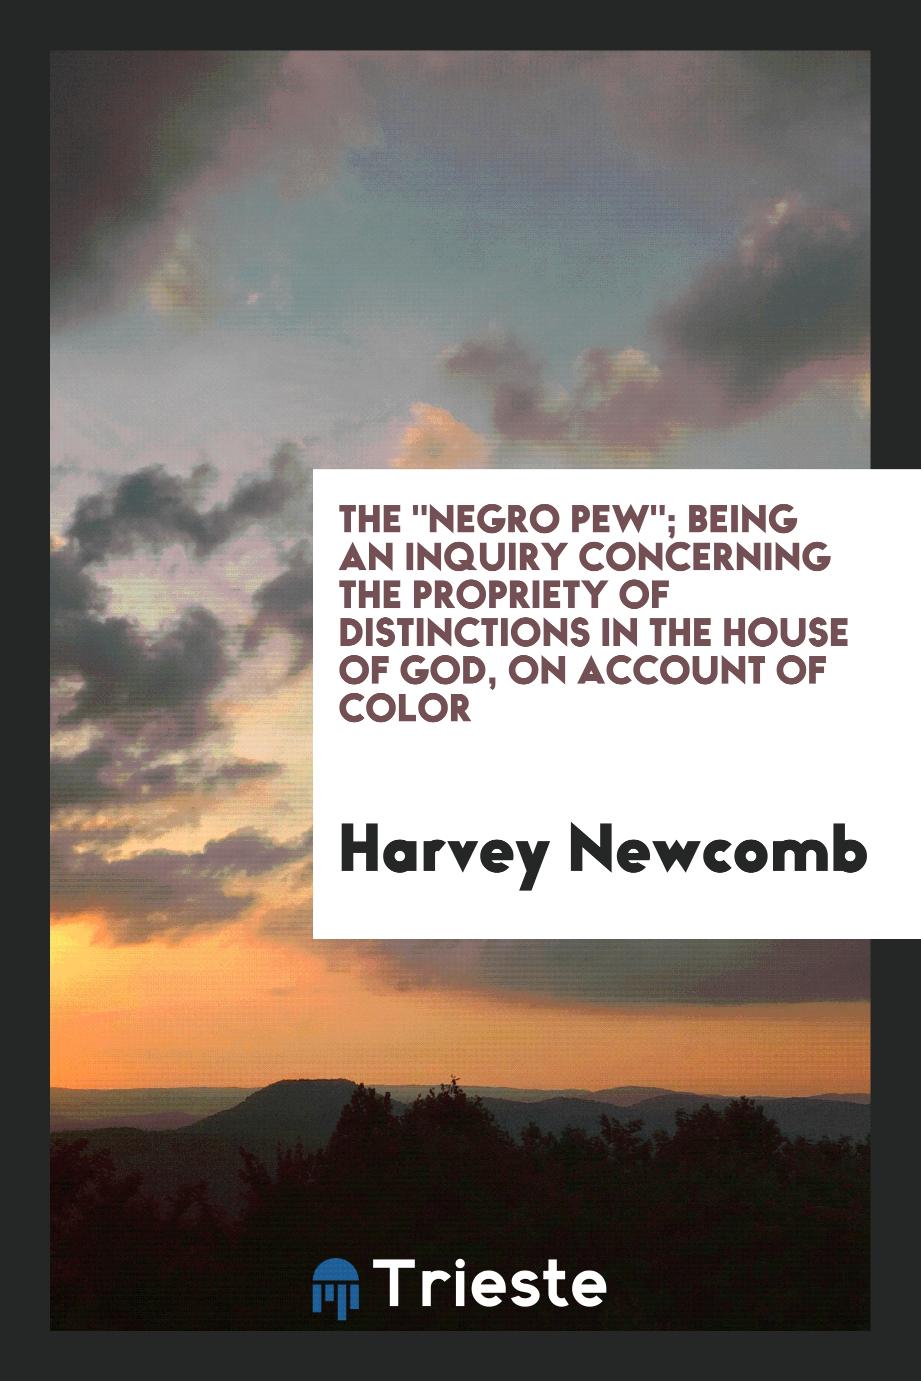 The "Negro Pew"; Being an Inquiry Concerning the Propriety of Distinctions in the House of God, on Account of Color